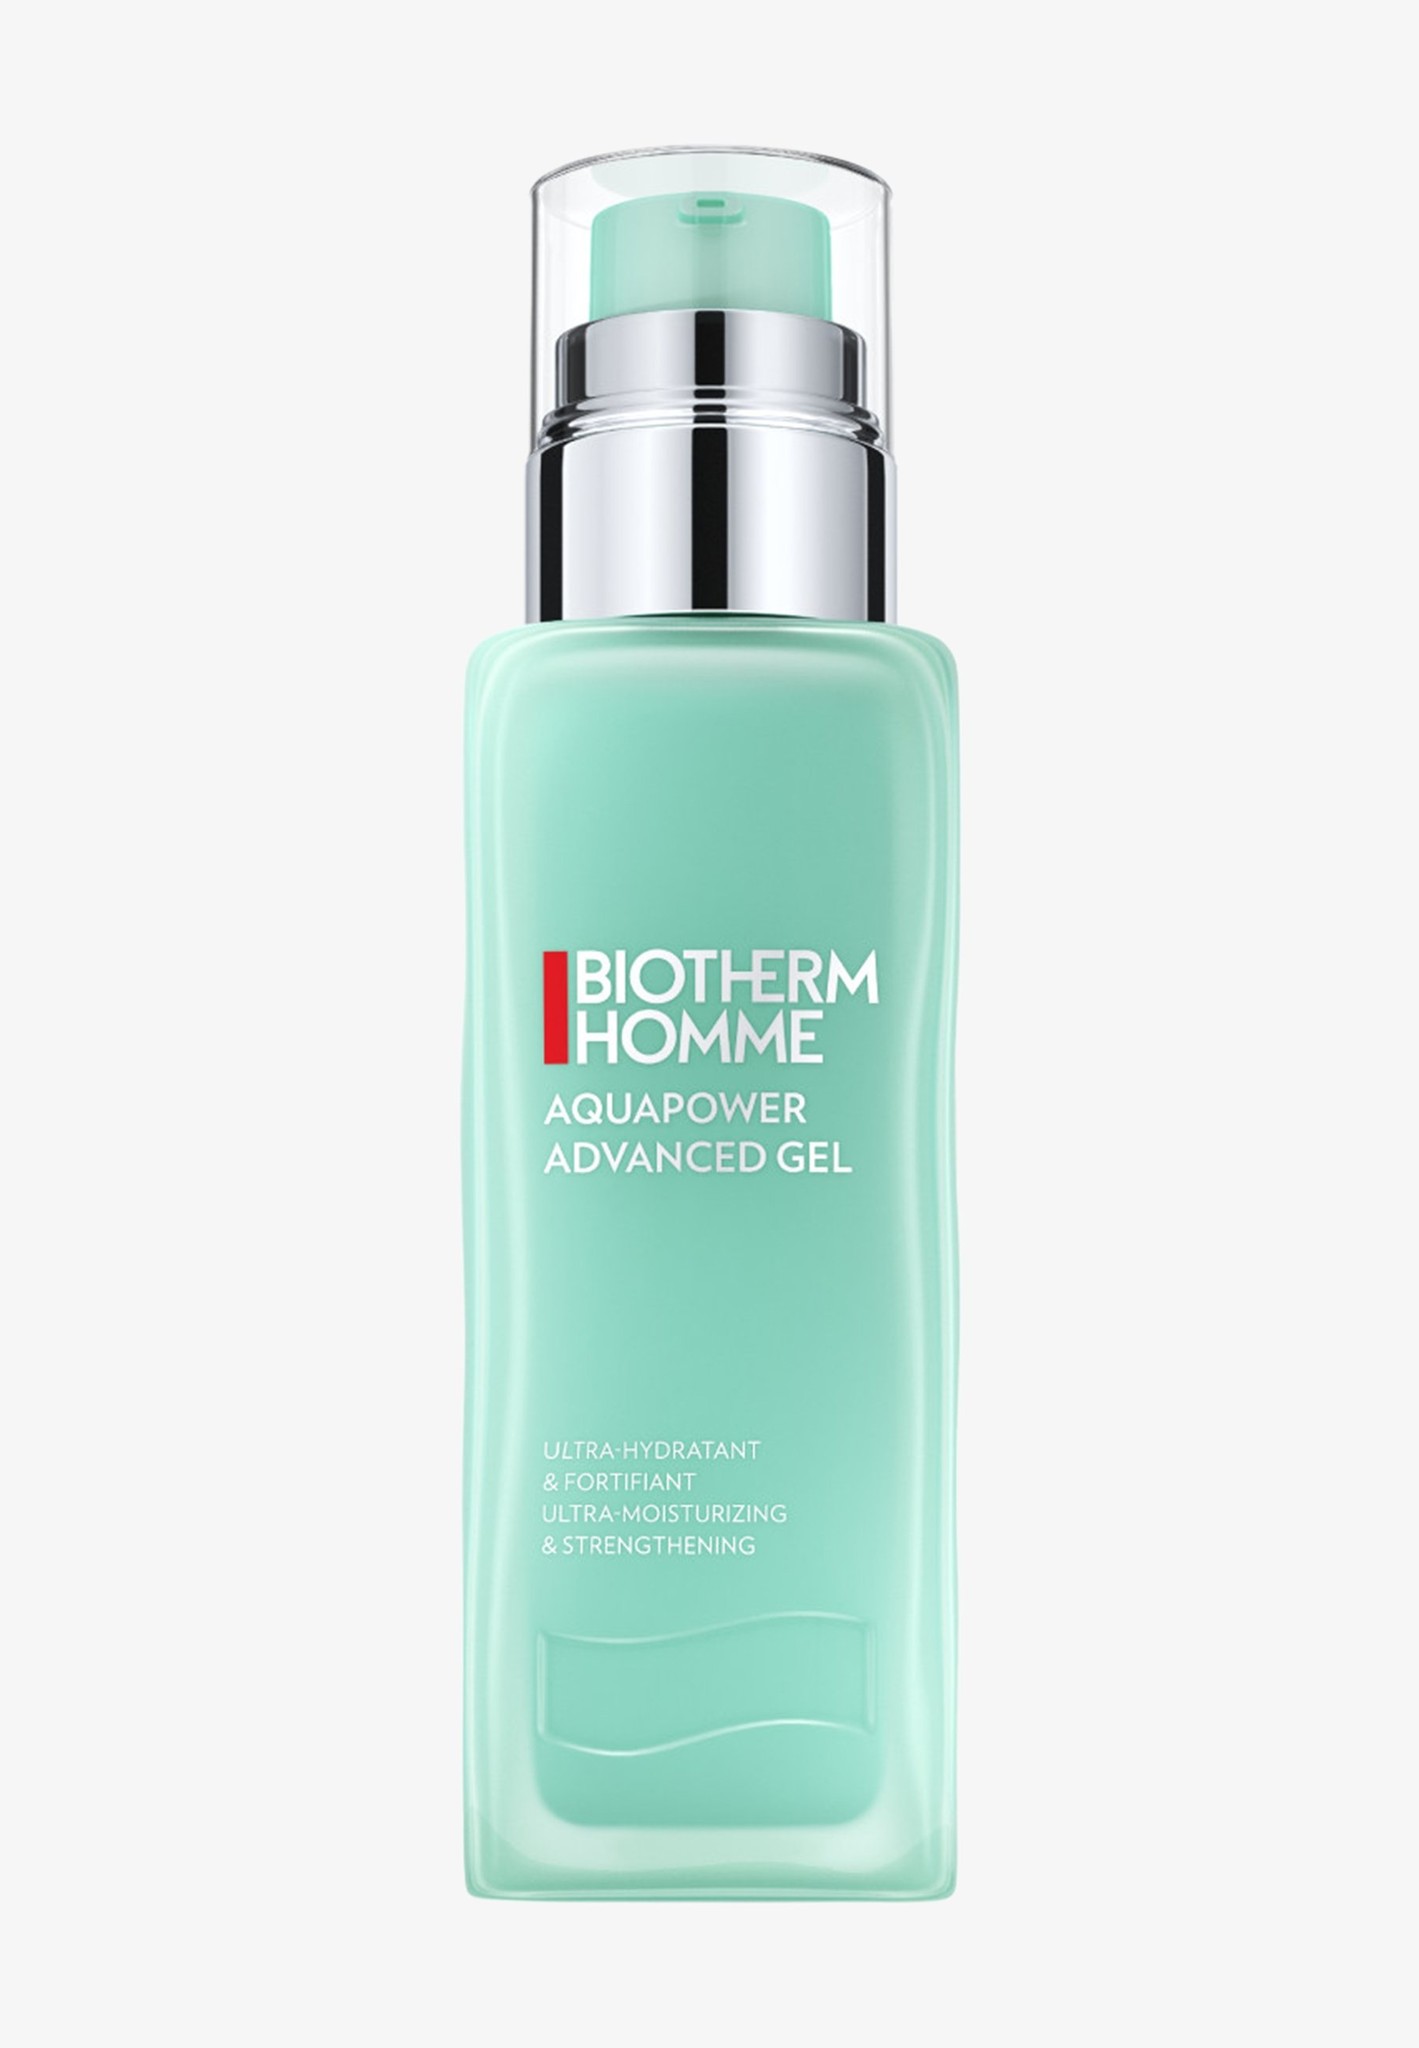 Biotherm Homme Aquapower Advanced Gel - Day Cream 75ml - Packaging damaged